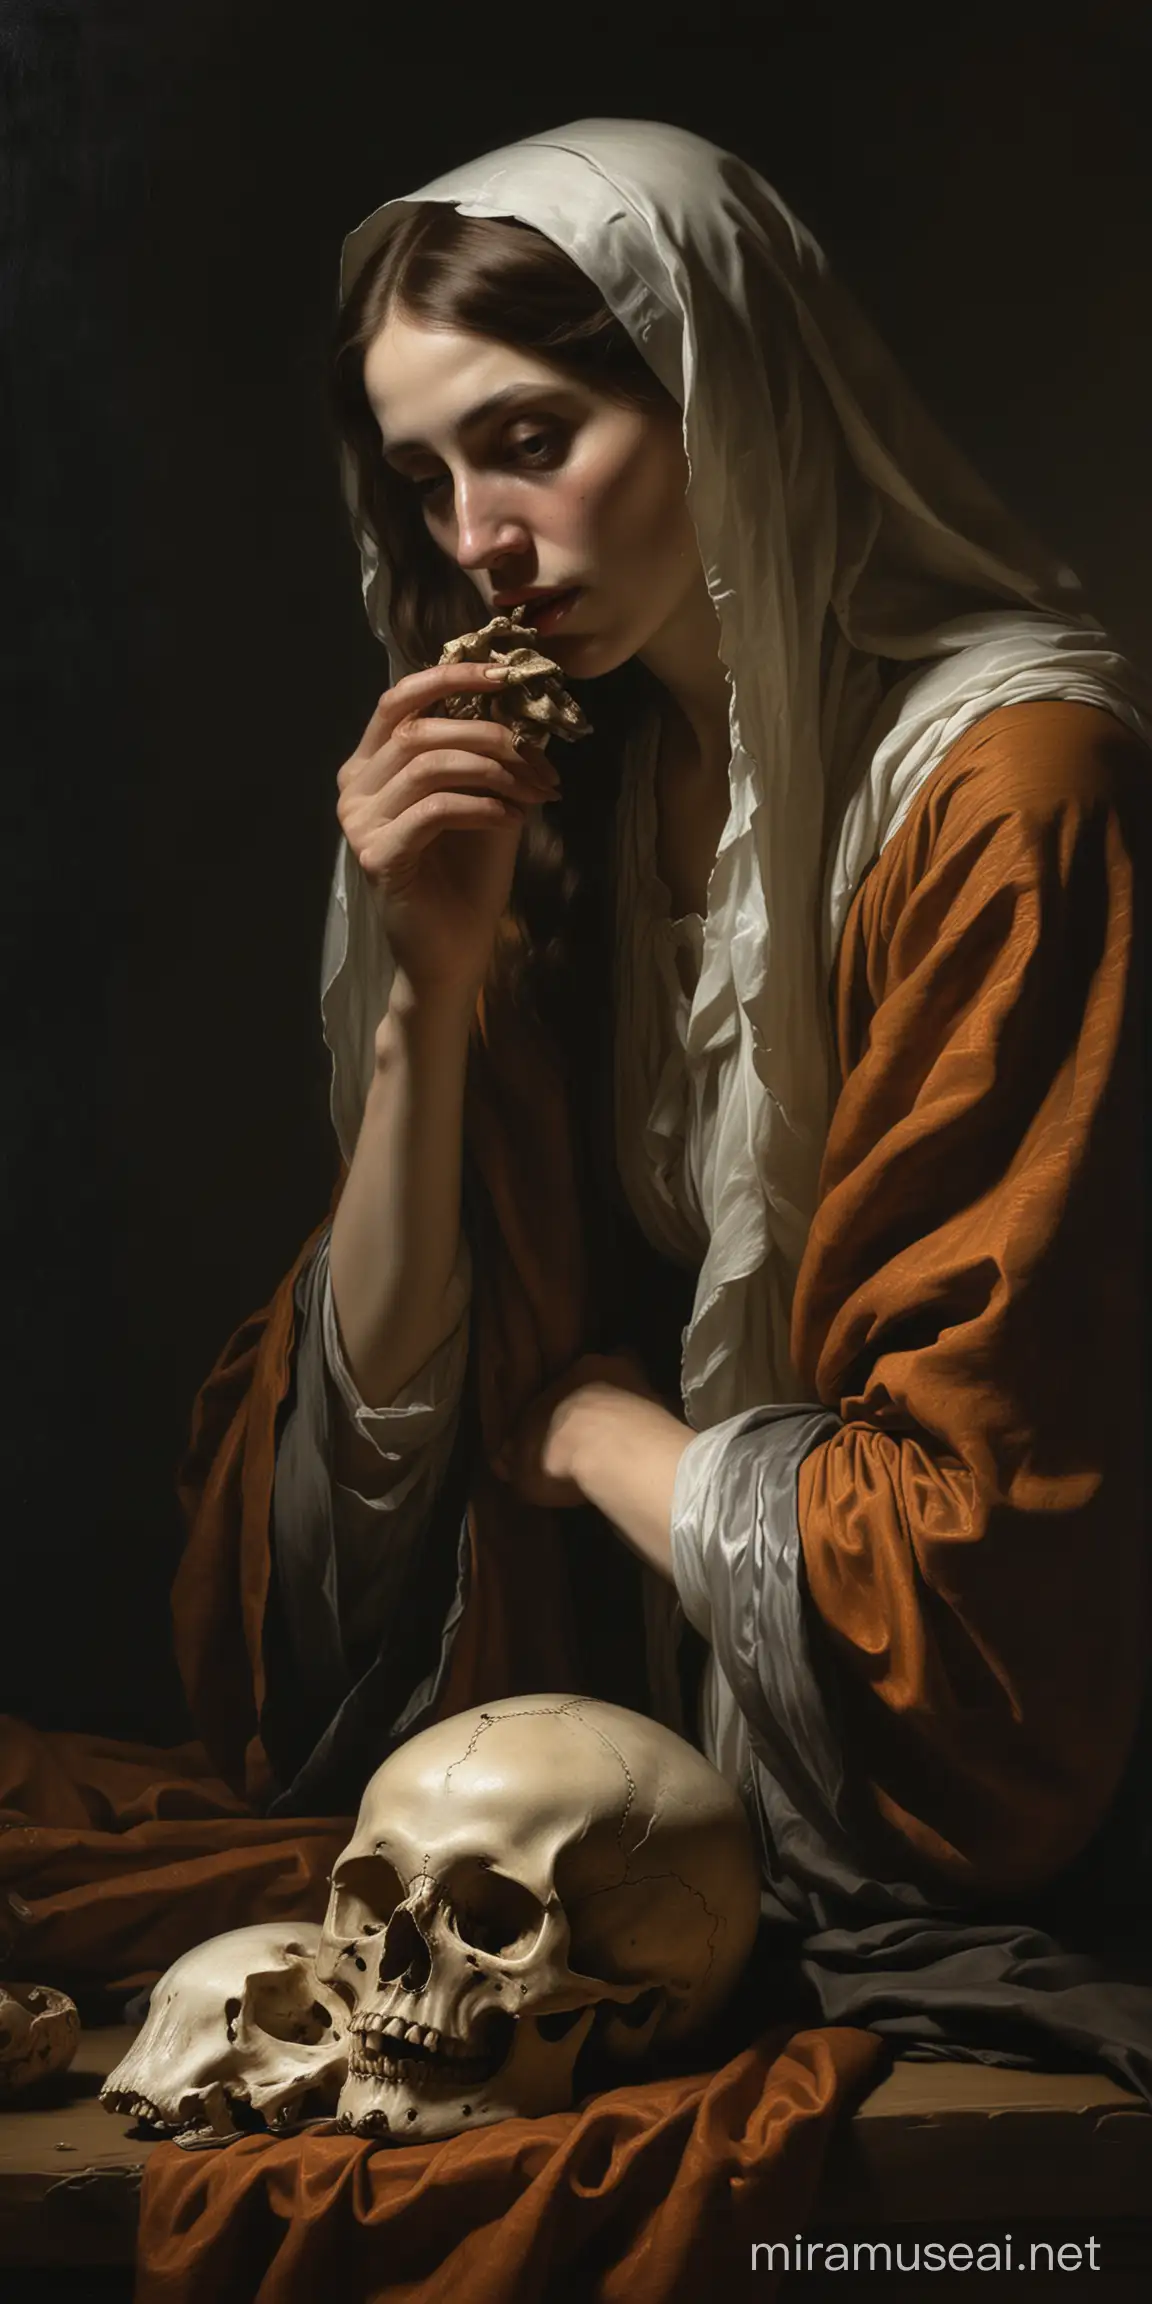 Penitent Mary Magdalene with Skull Rembrandt Style Dramatic Chiaroscuro Painting